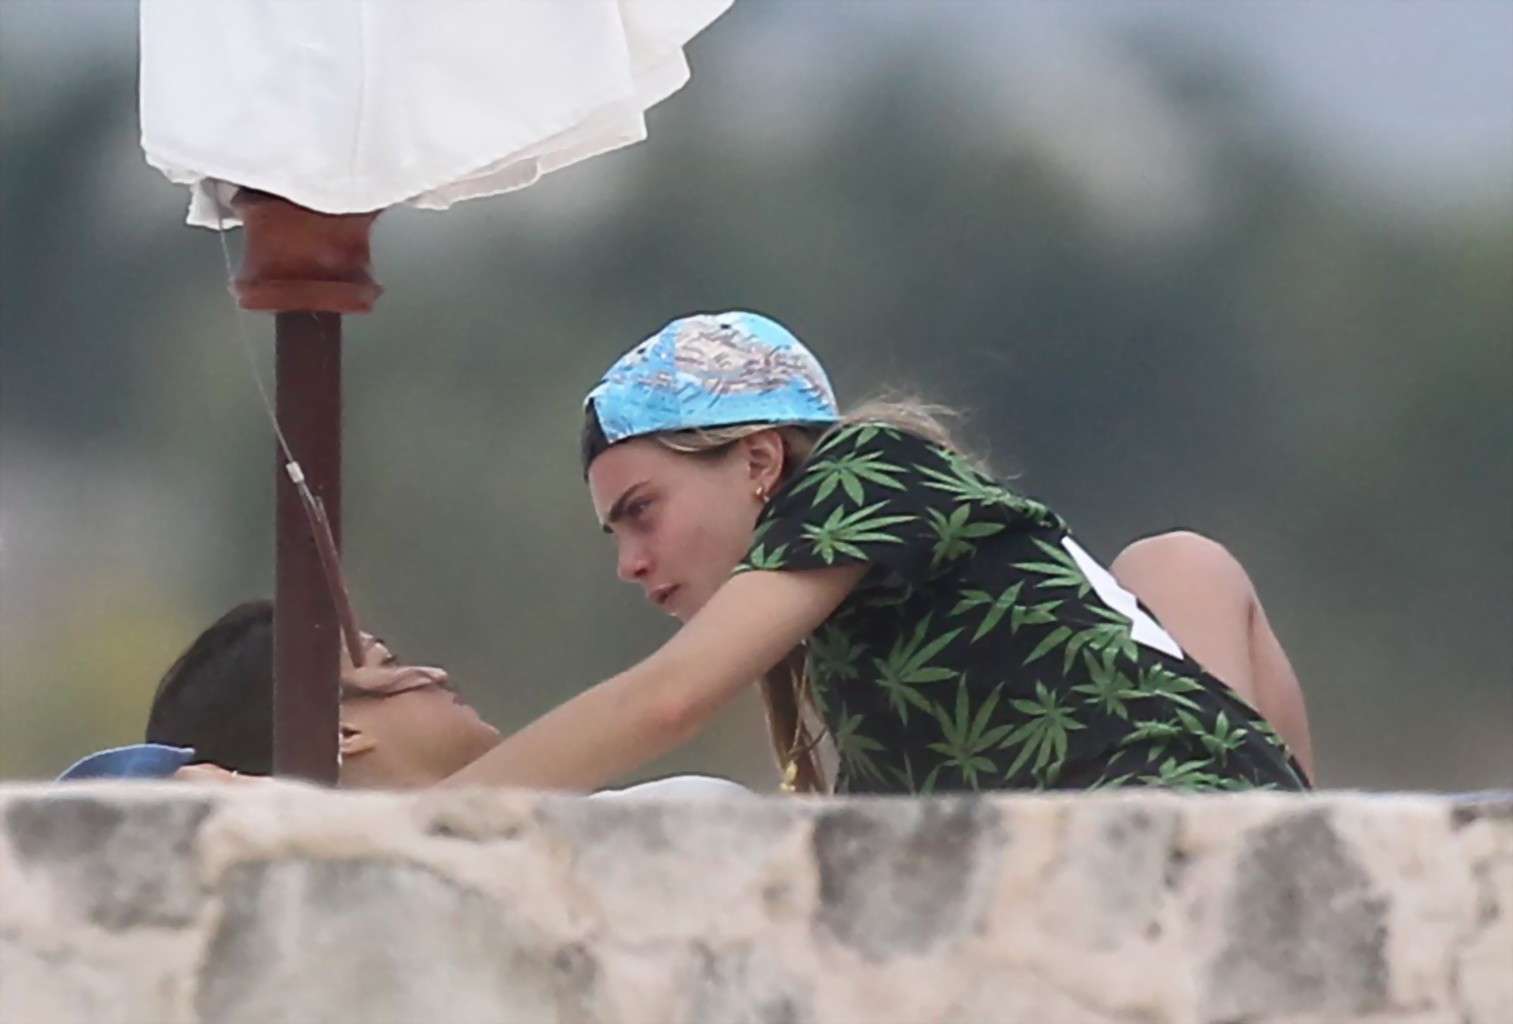 Michelle Rodriguez and Cara Delevingne cuddling and groping on the beach #75200964